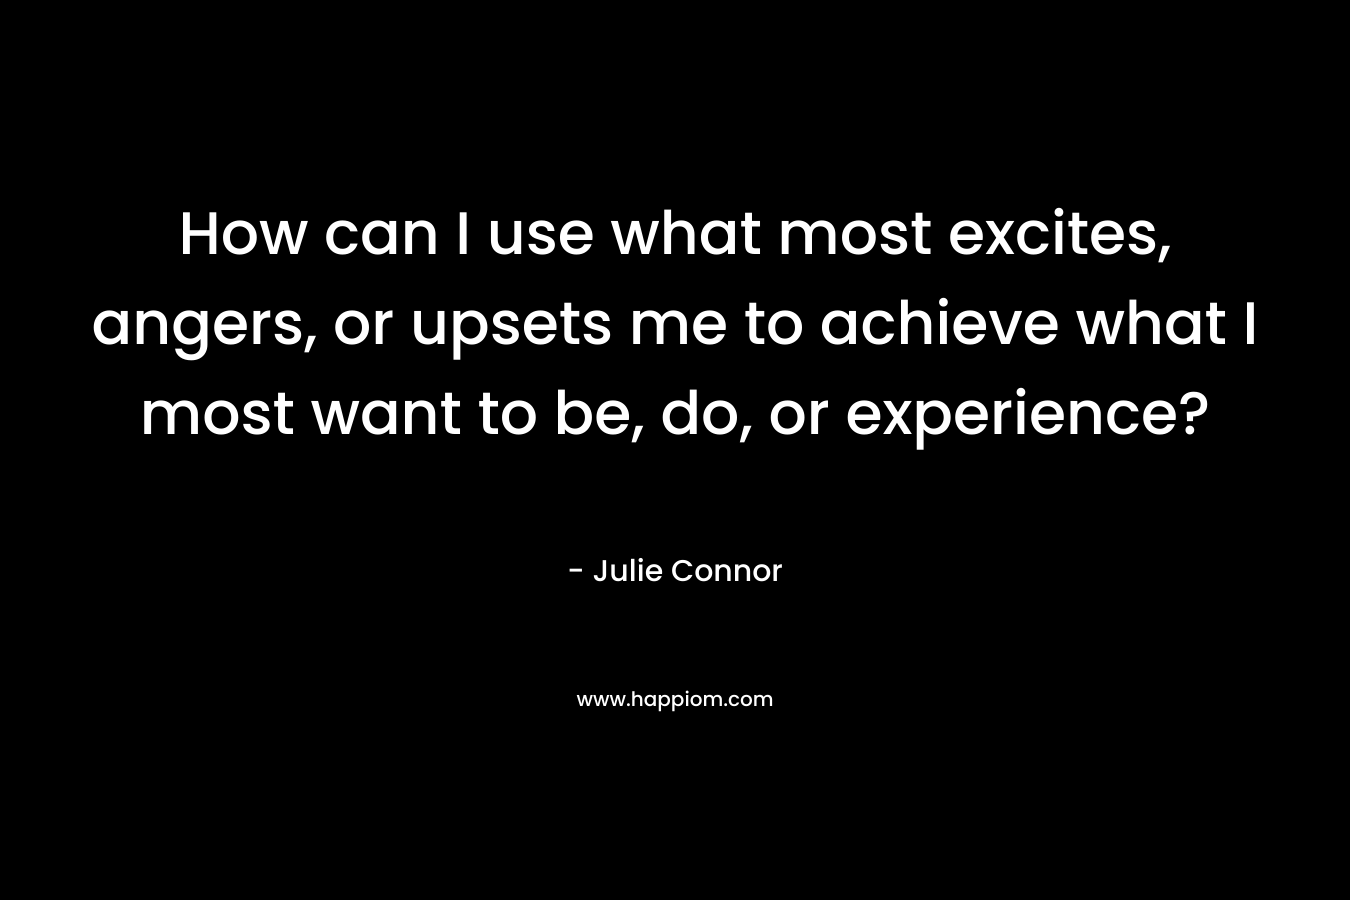 How can I use what most excites, angers, or upsets me to achieve what I most want to be, do, or experience? – Julie Connor